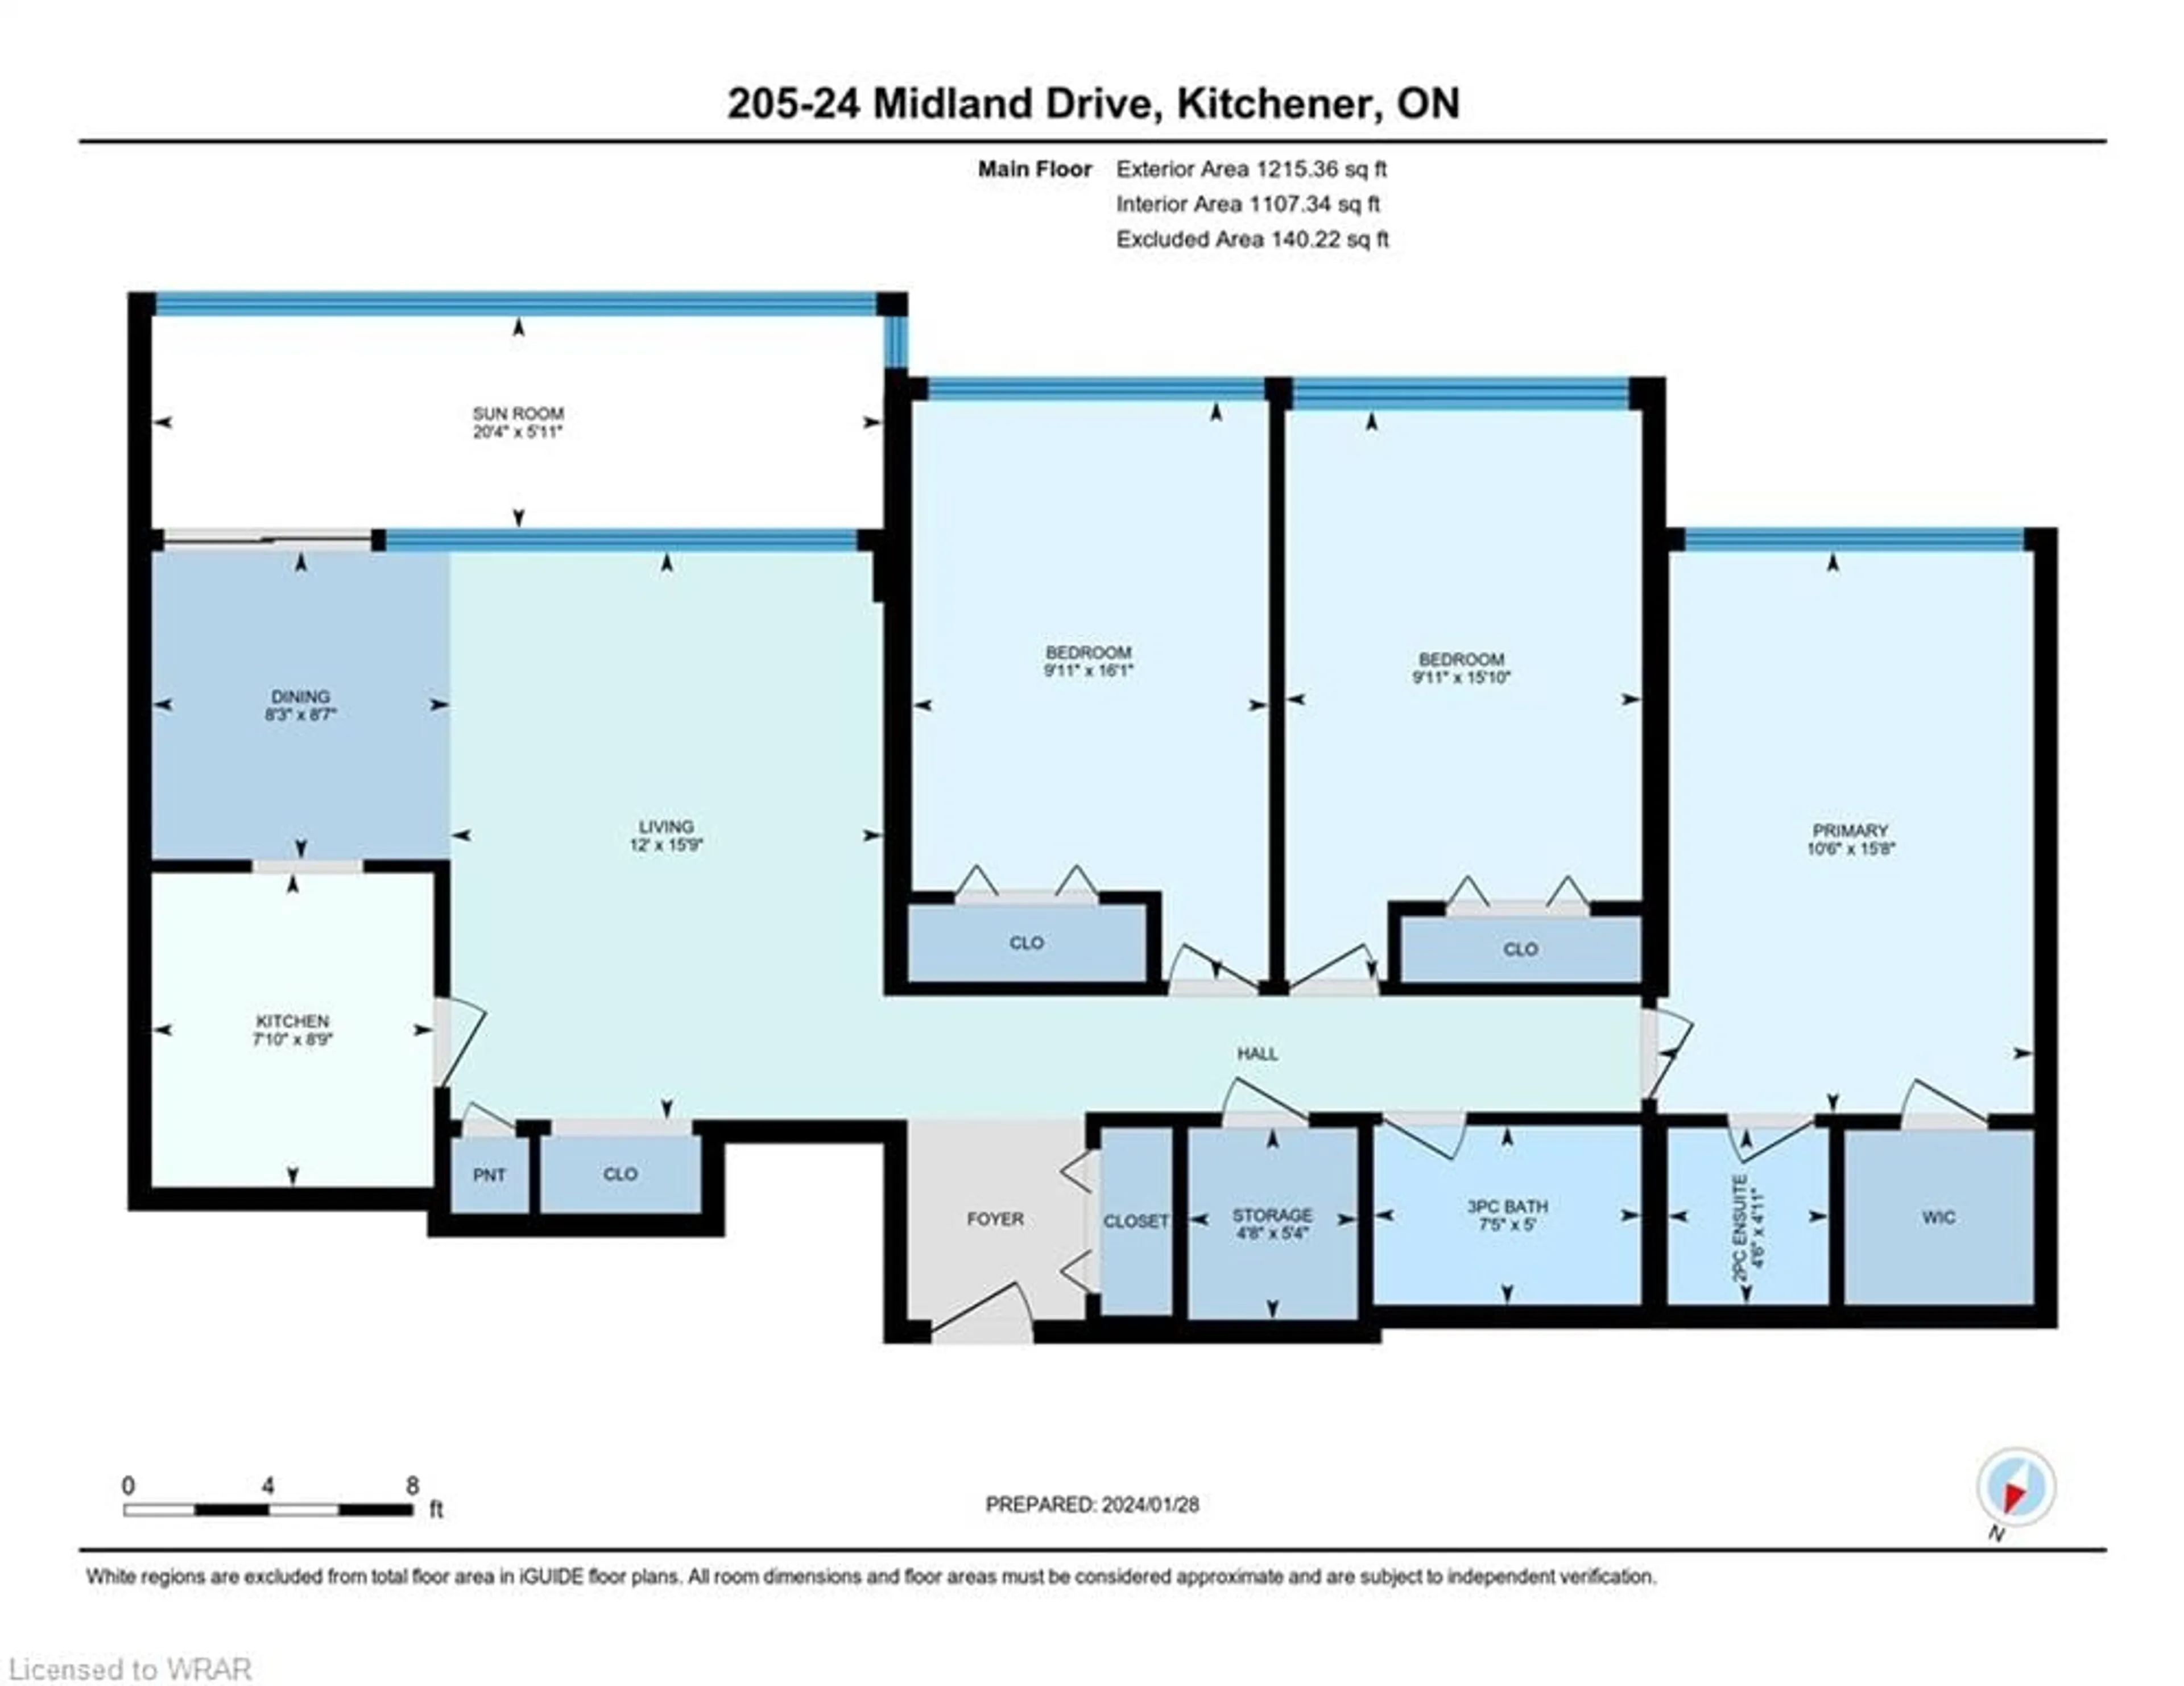 Floor plan for 24 Midland Dr #205, Kitchener Ontario N2A 2A8